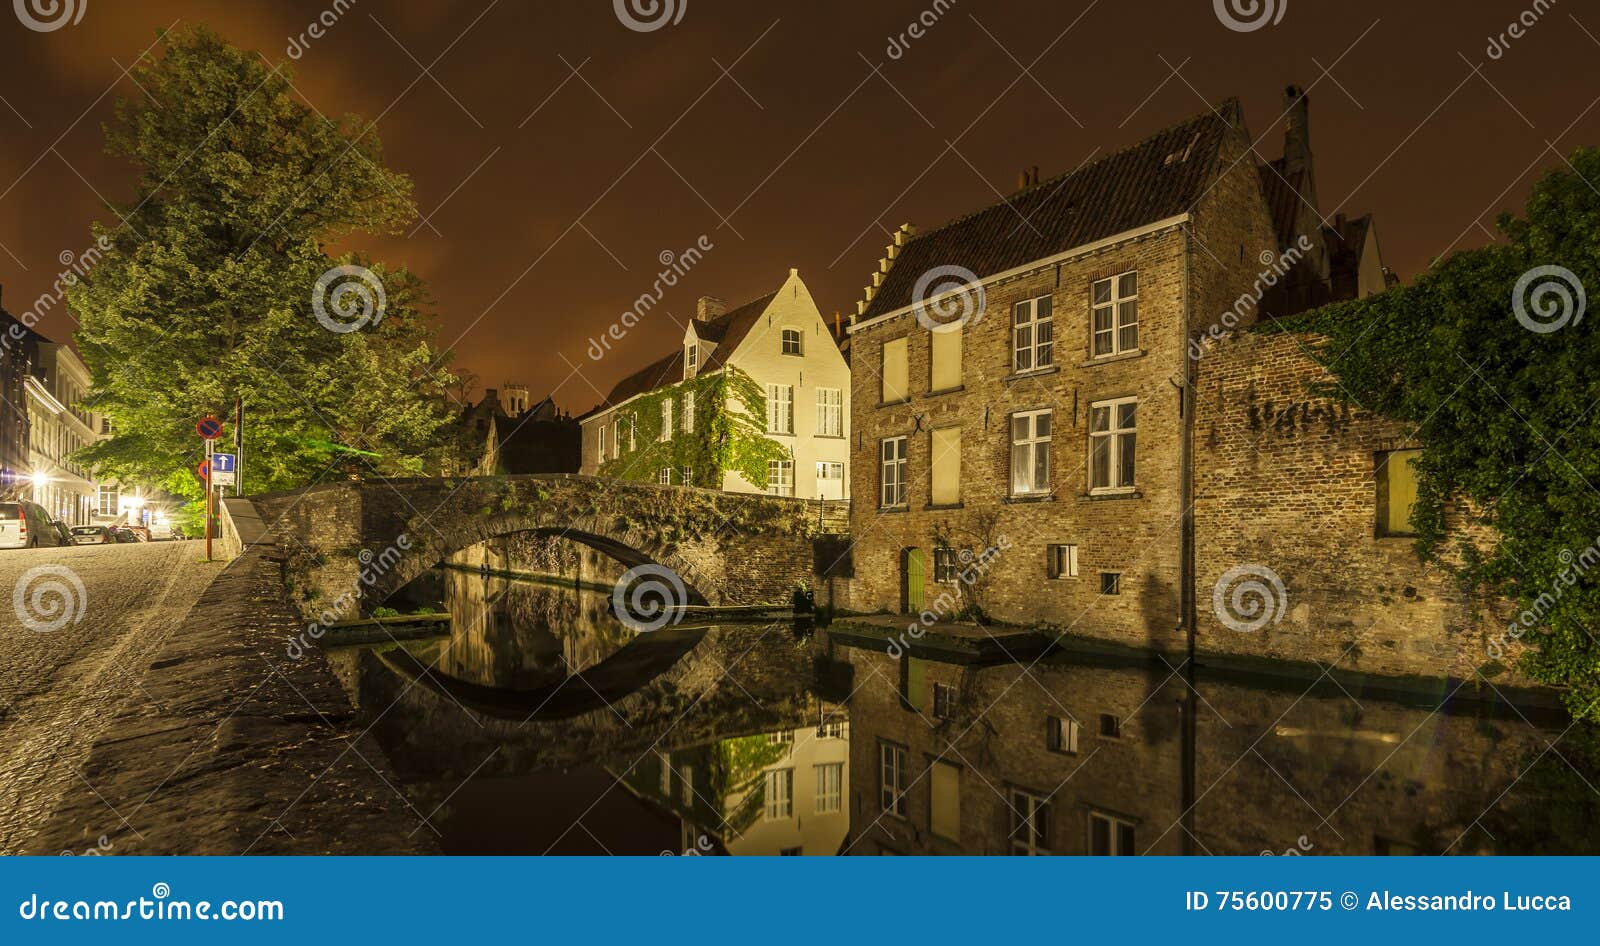 nocturnal view of a canal in bruges